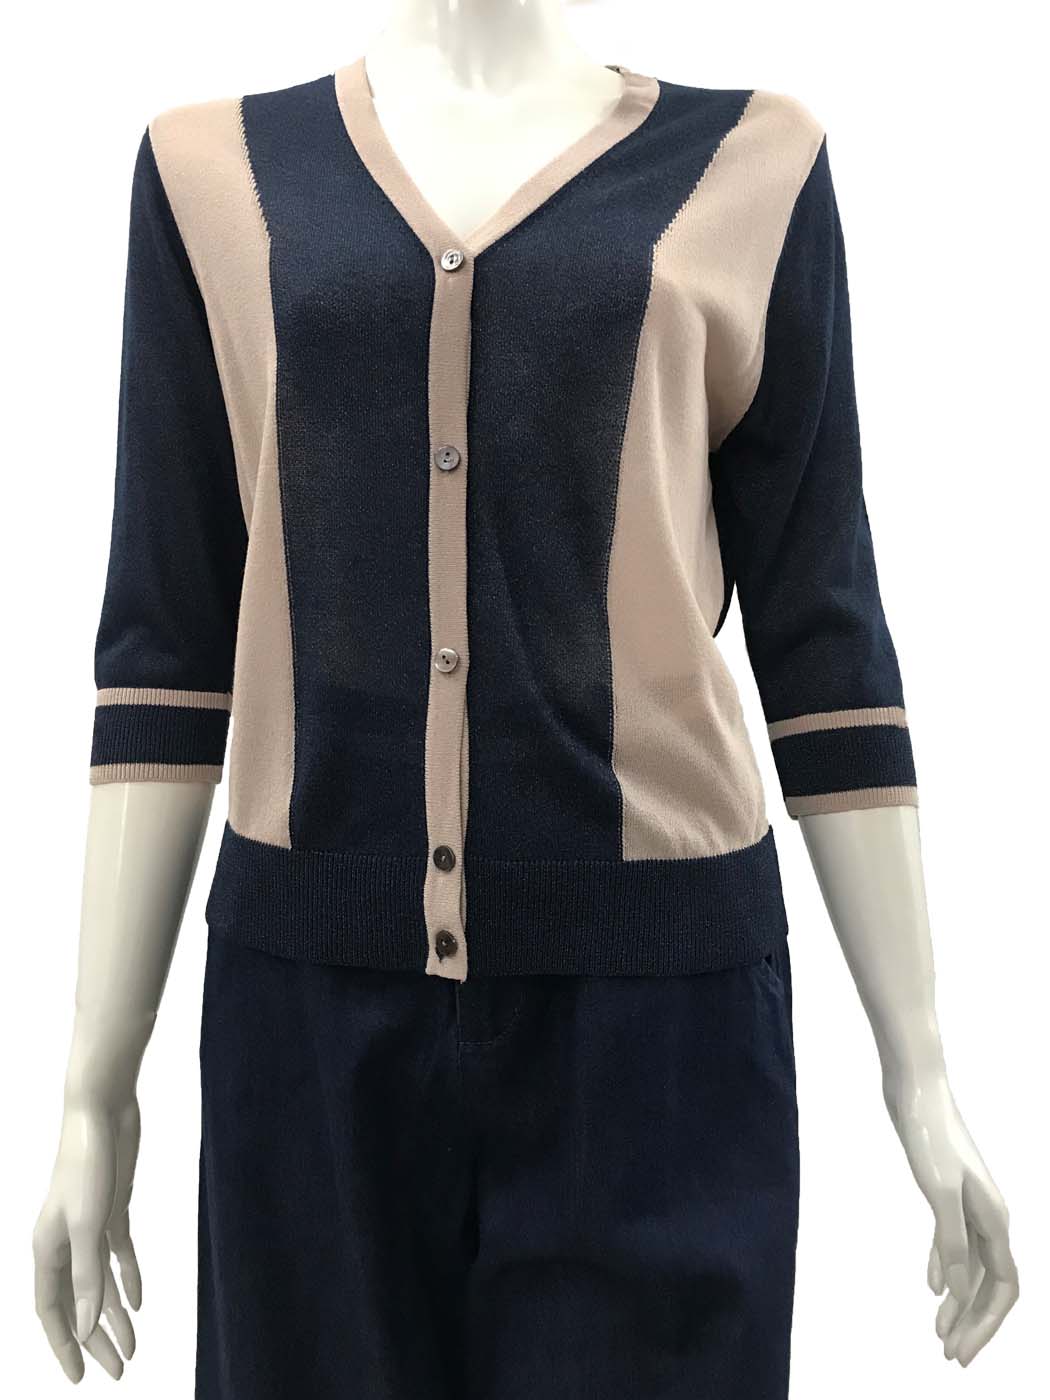 Joan Sports Color block Knitted Cardigan